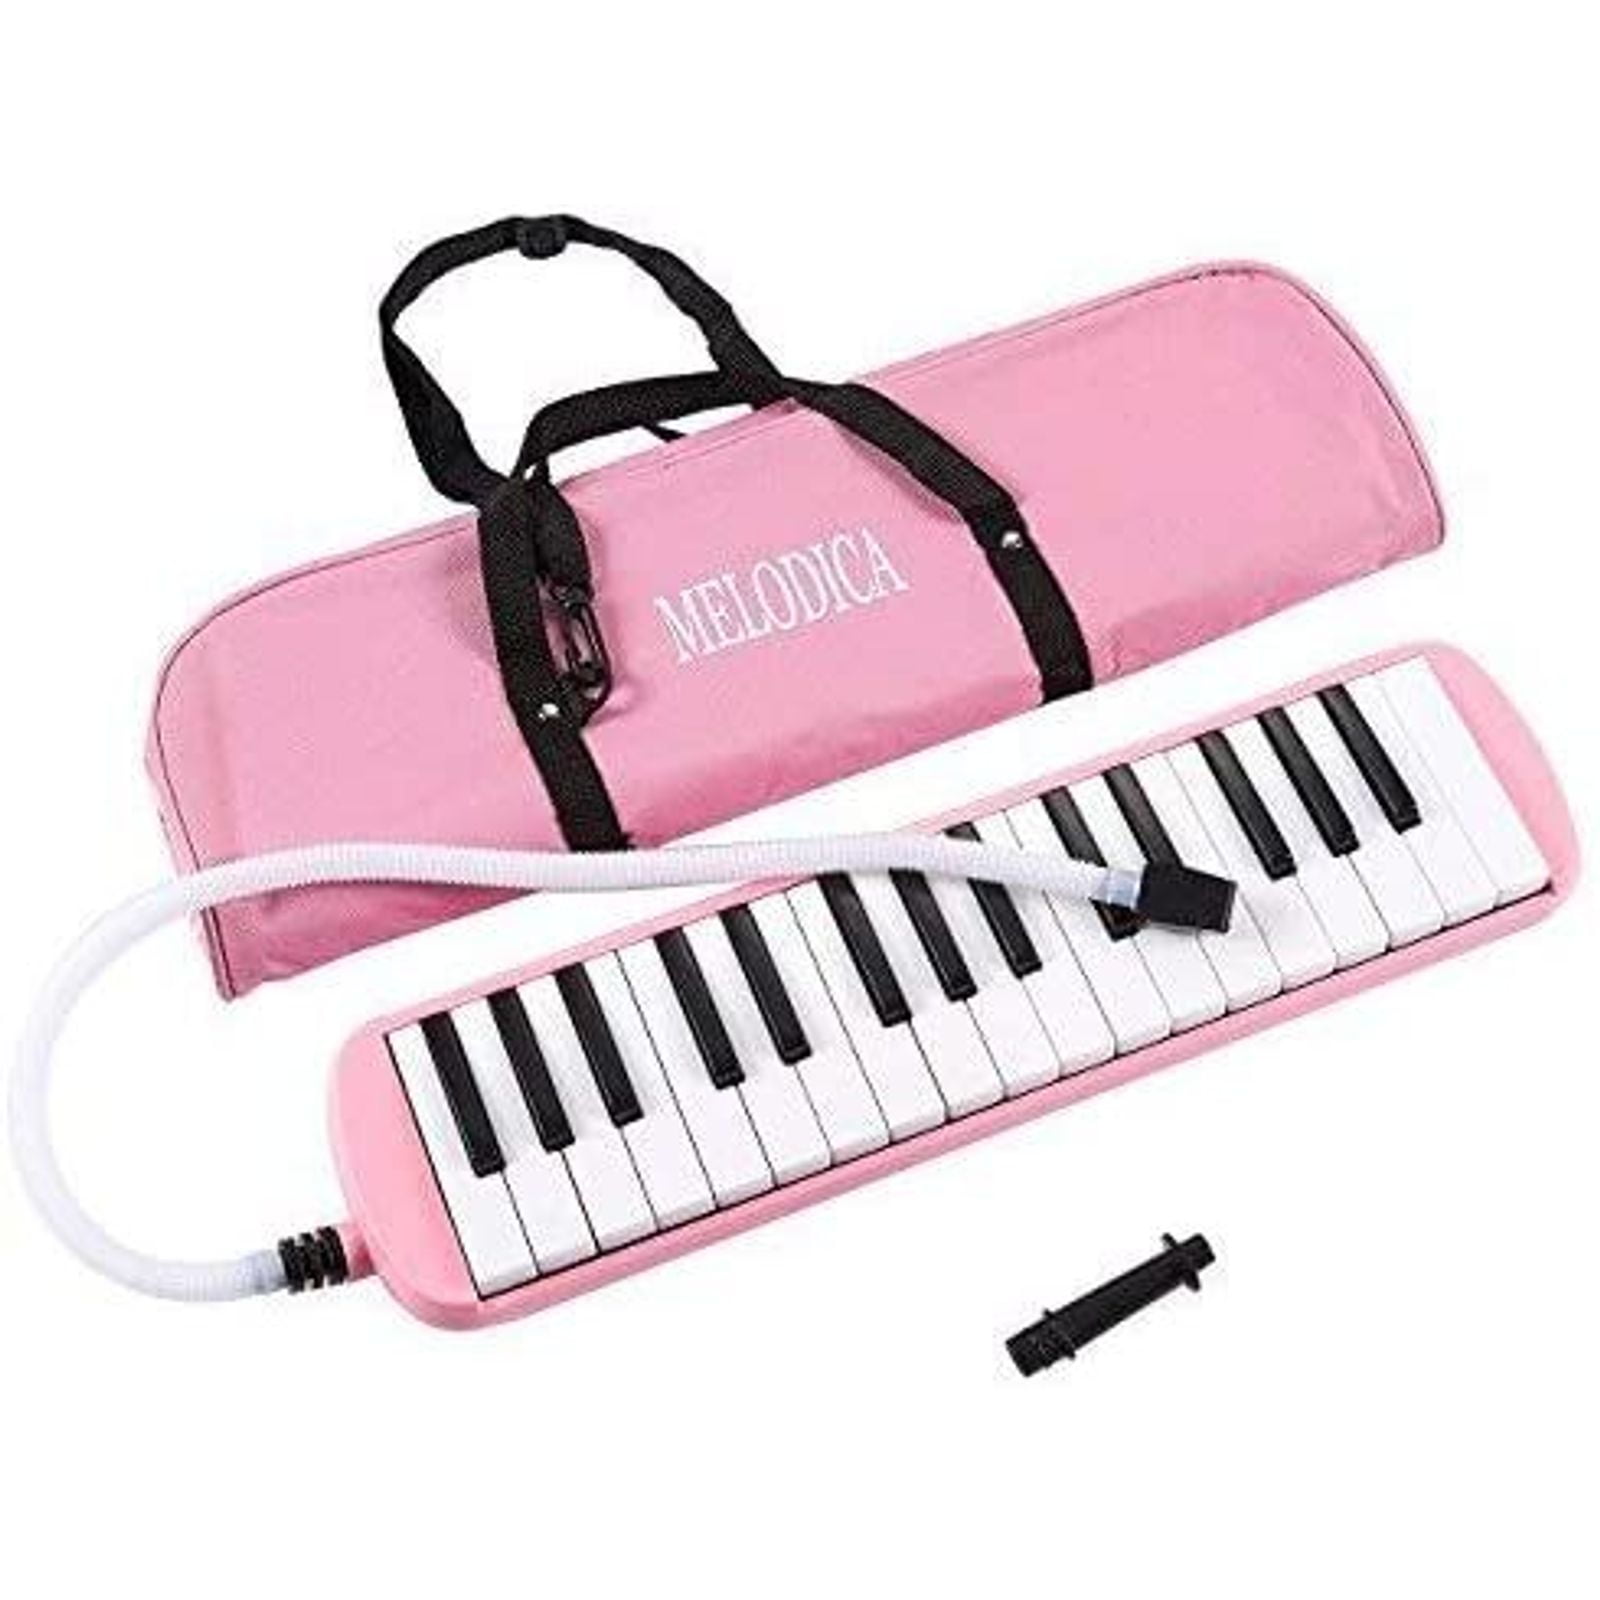 Juvale Melodica Keyboard - 32 Key Piano Style Melodion, Students Musical  Instrument, Suitable for Beginners and Children, Includes Carrying Bag,  Pink,  x  x  inches 